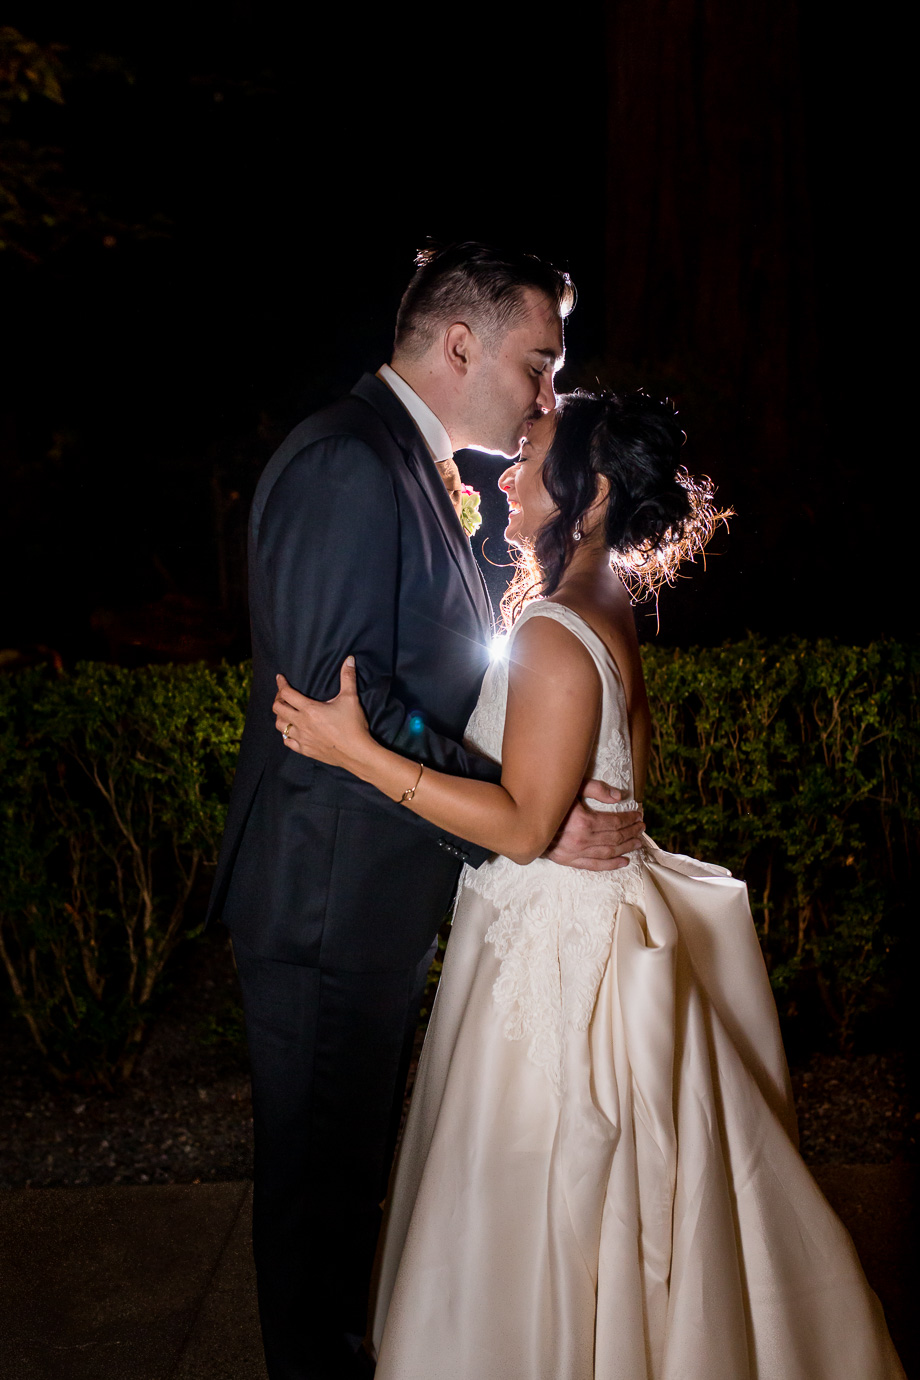 flash photo kiss on the forehead at the end of a wedding night